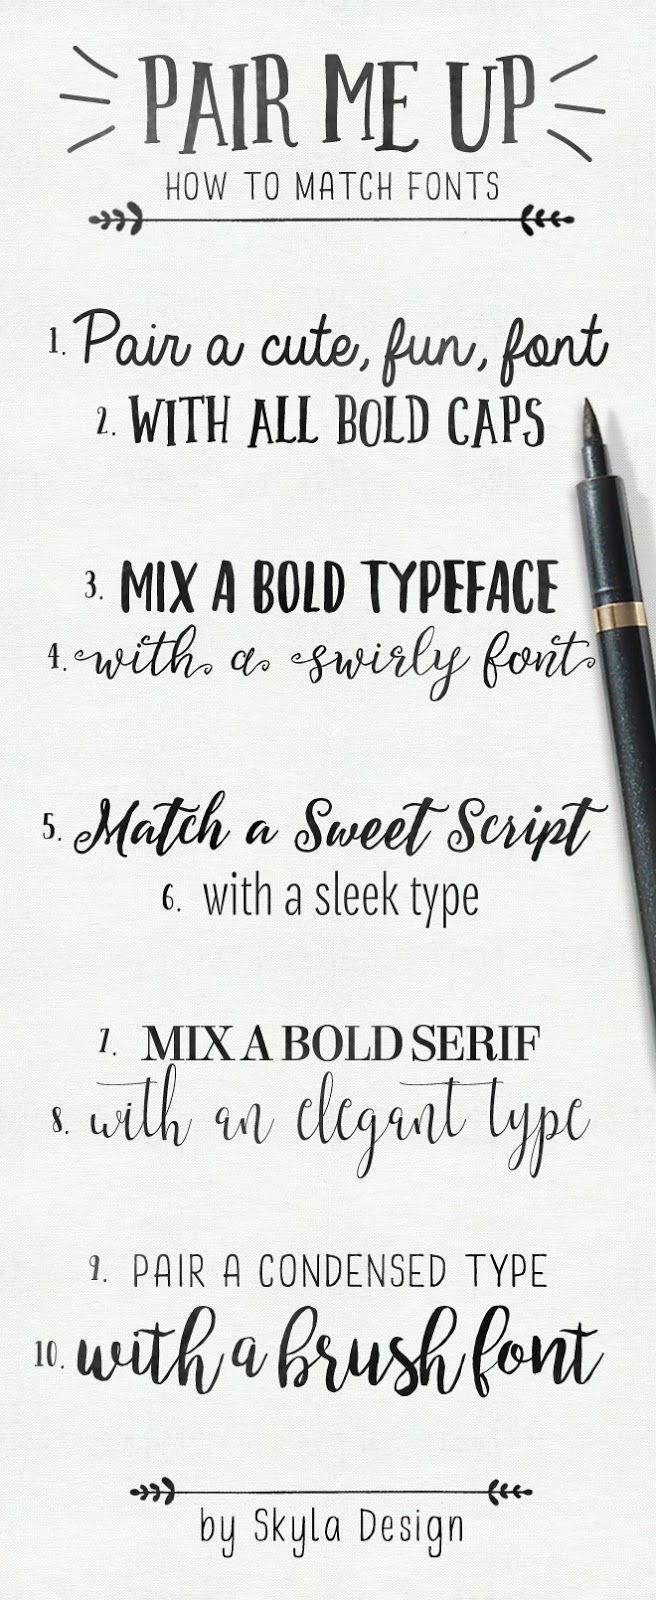 – Skyla Design -: Pair me up – How to match fonts